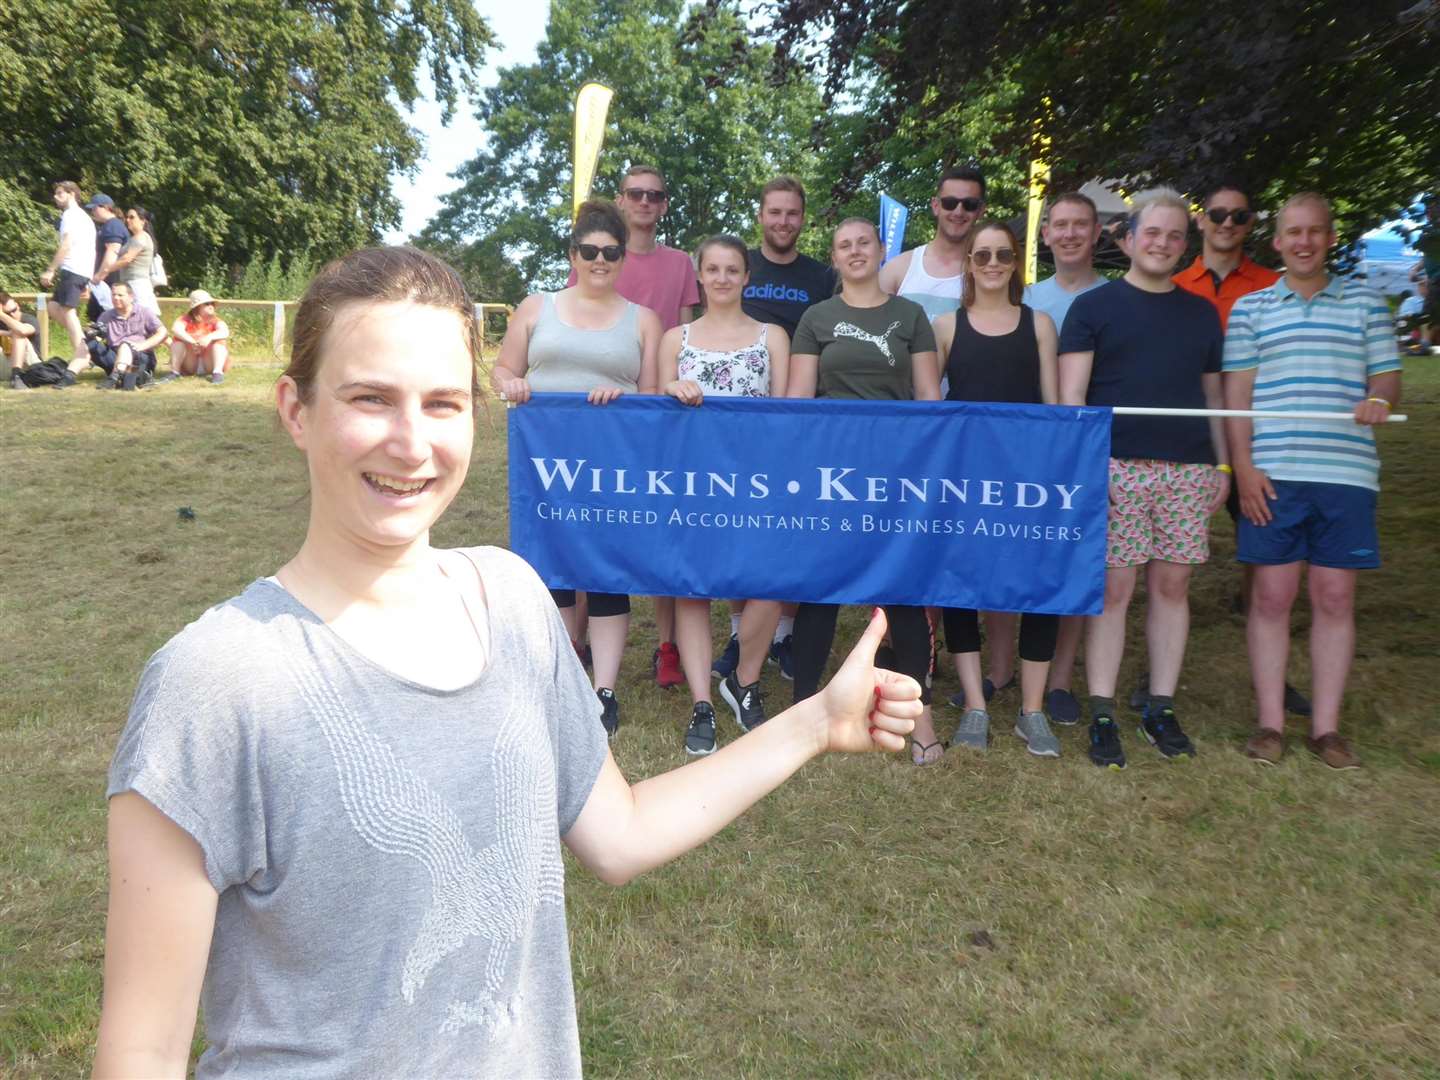 Alex Andrews and team from event supporters Wilkins Kennedy who raised funds for Demelza at the KM Dragon Boat Race 2018.